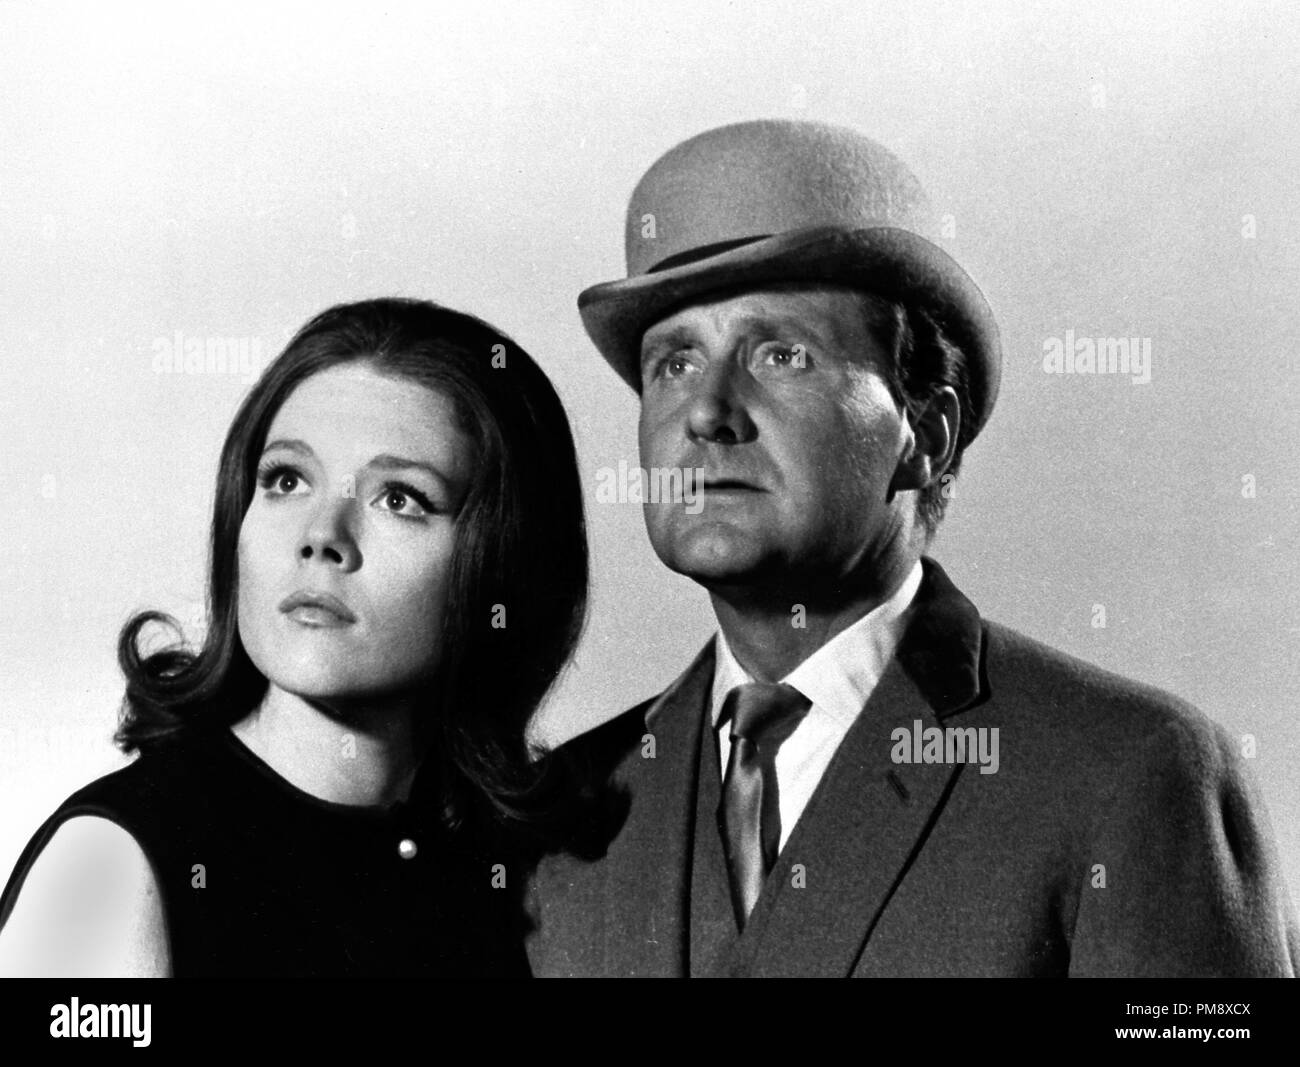 Studio Publicity Still: 'The Avengers'  Diana Rigg, Patrick Macnee  late 1960s     File Reference # 32039 108THA Stock Photo